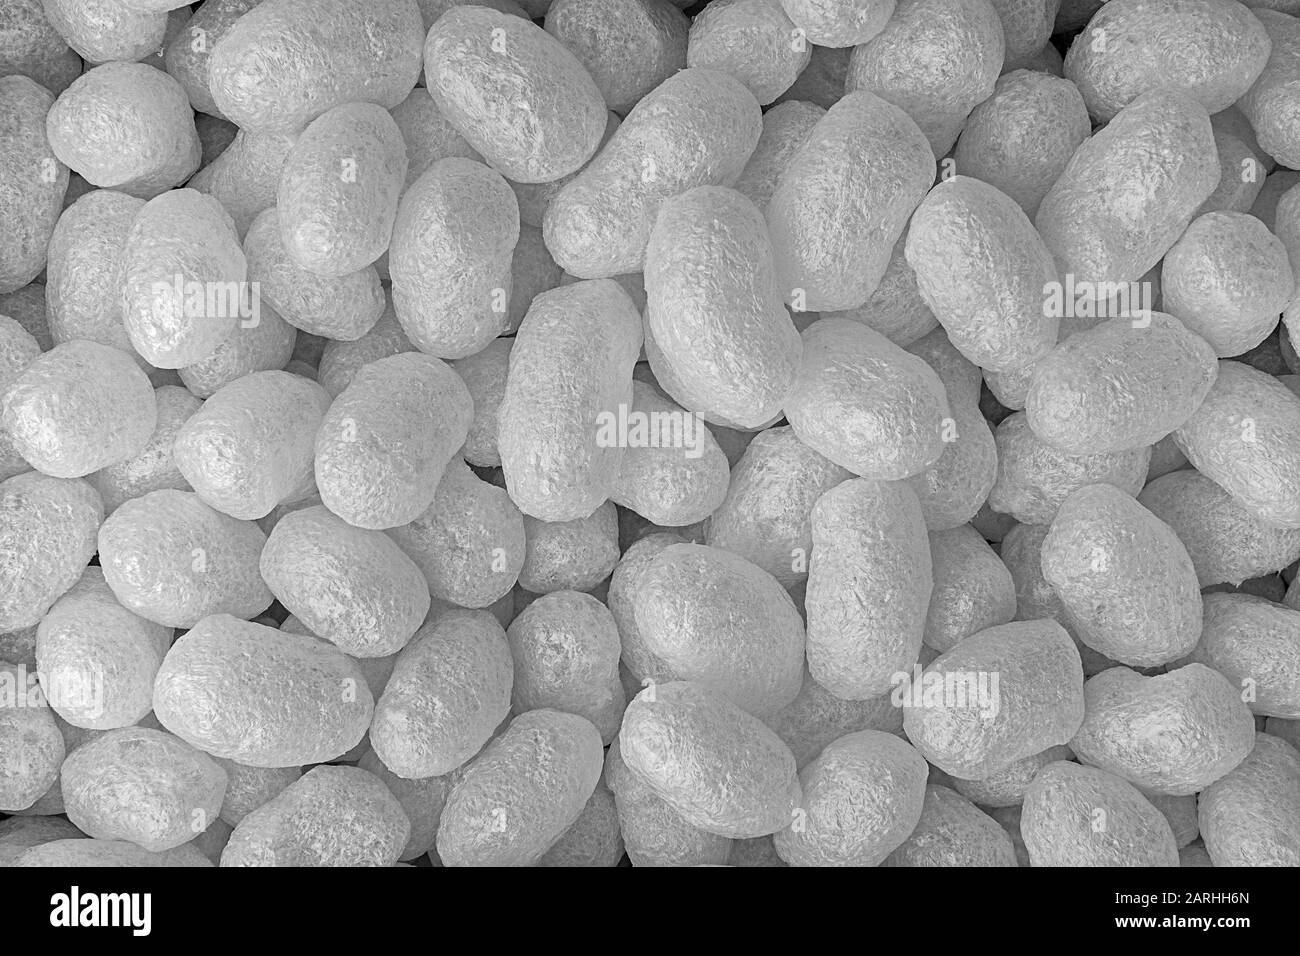 white foam balls to protect objects during shipping, photographed in full frame Stock Photo